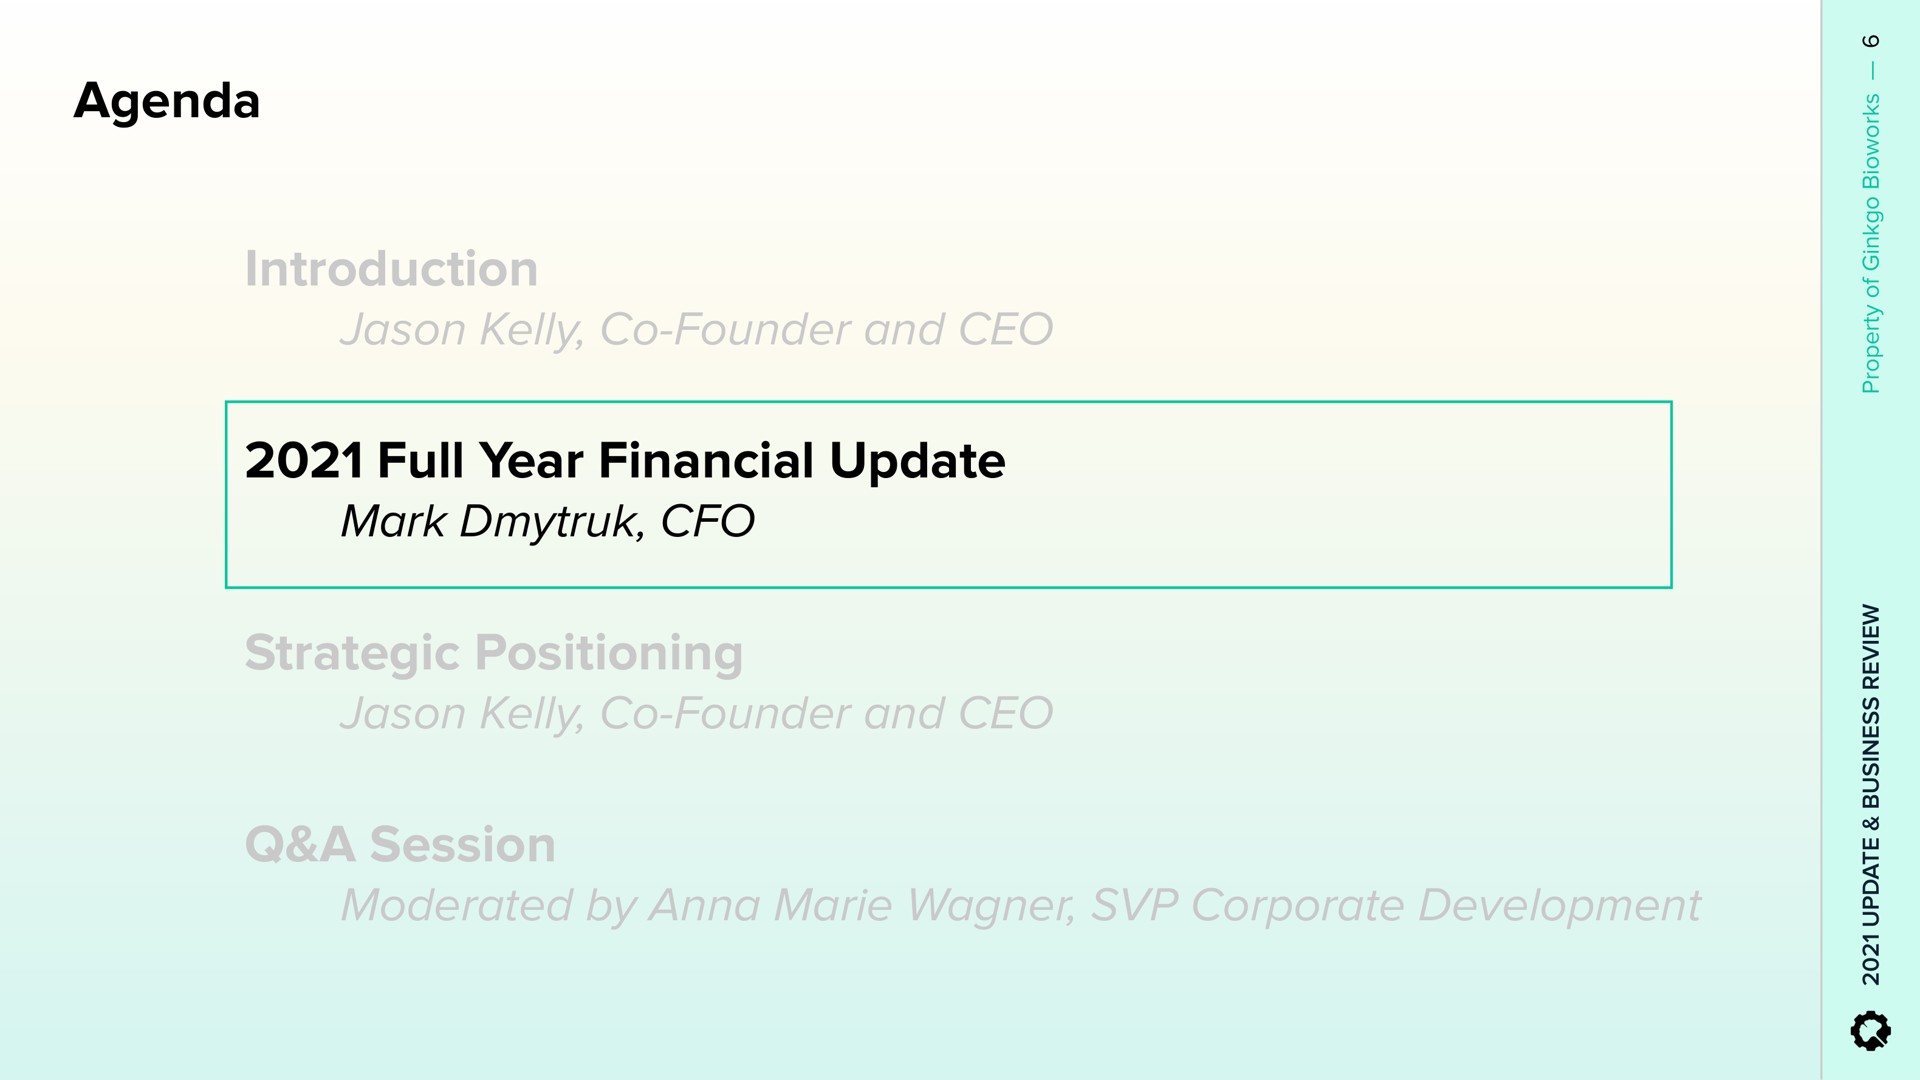 agenda introduction kelly founder and full year financial update mark strategic positioning kelly founder and a session moderated by anna corporate development | Ginkgo